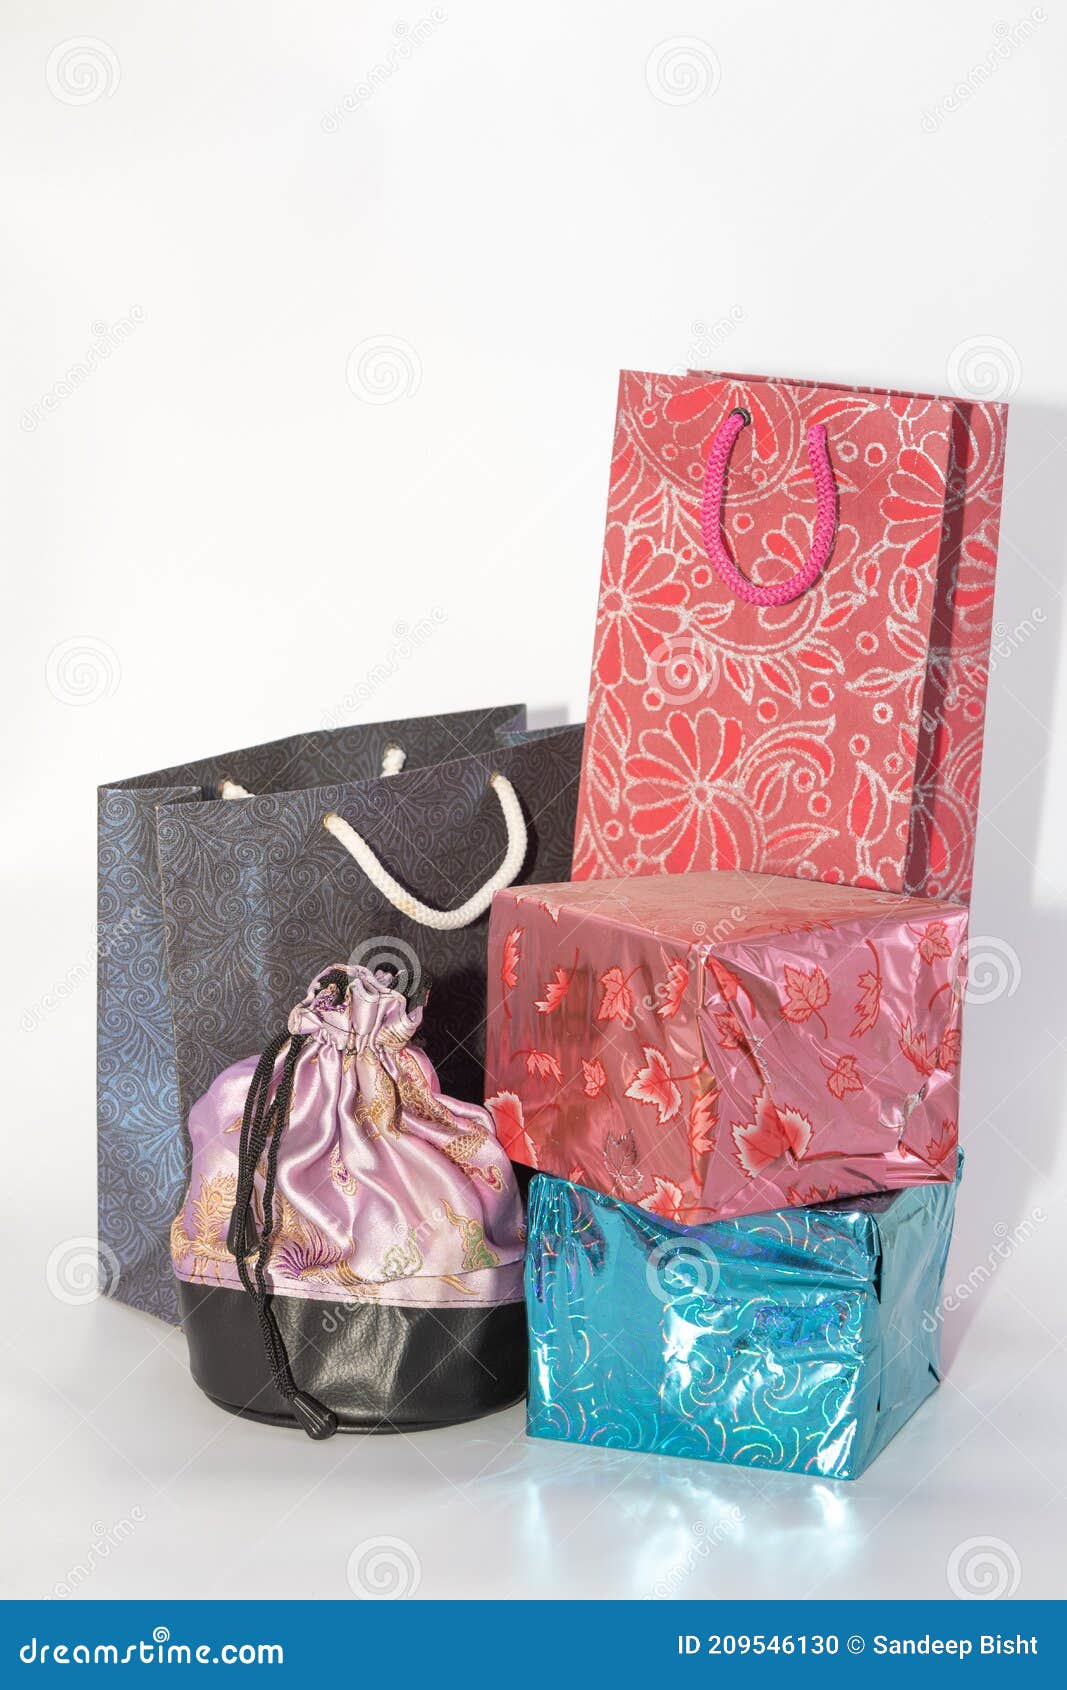 Colorful Paper Carry Bags and a Silk Cloth Pouch Stock Photo - Image of ...